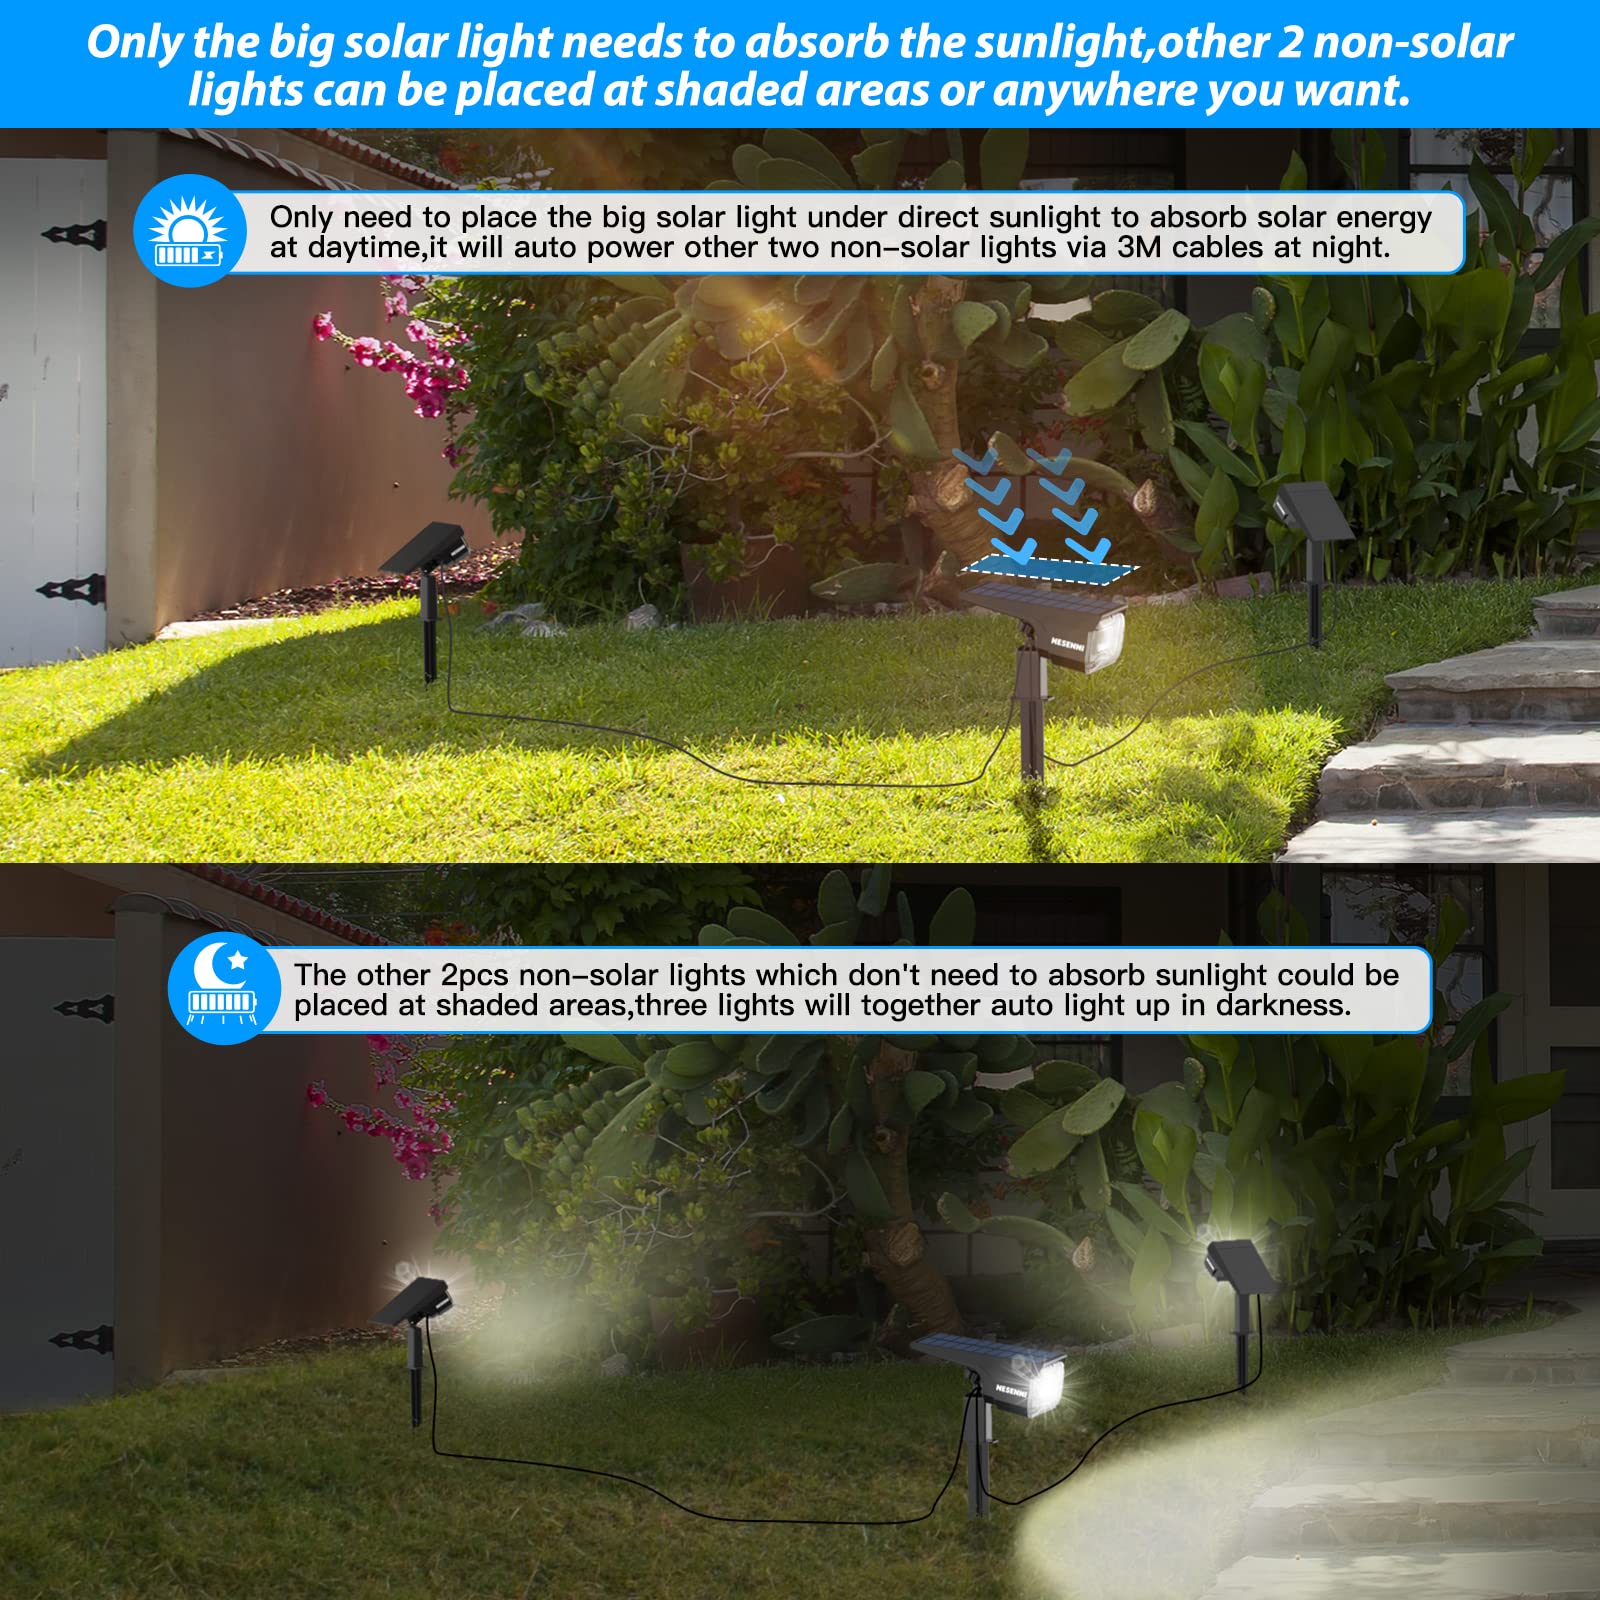 100LED Solar Outdoor Lights Power 2PCS 40LED Non-Solar Lights for Shady Areas via 9.8ft Cables(No Need Plug in), IP68 Solar Spotlights Outdoor, 3 Light Modes Auto ON/Off Solar Powered Spot Lights